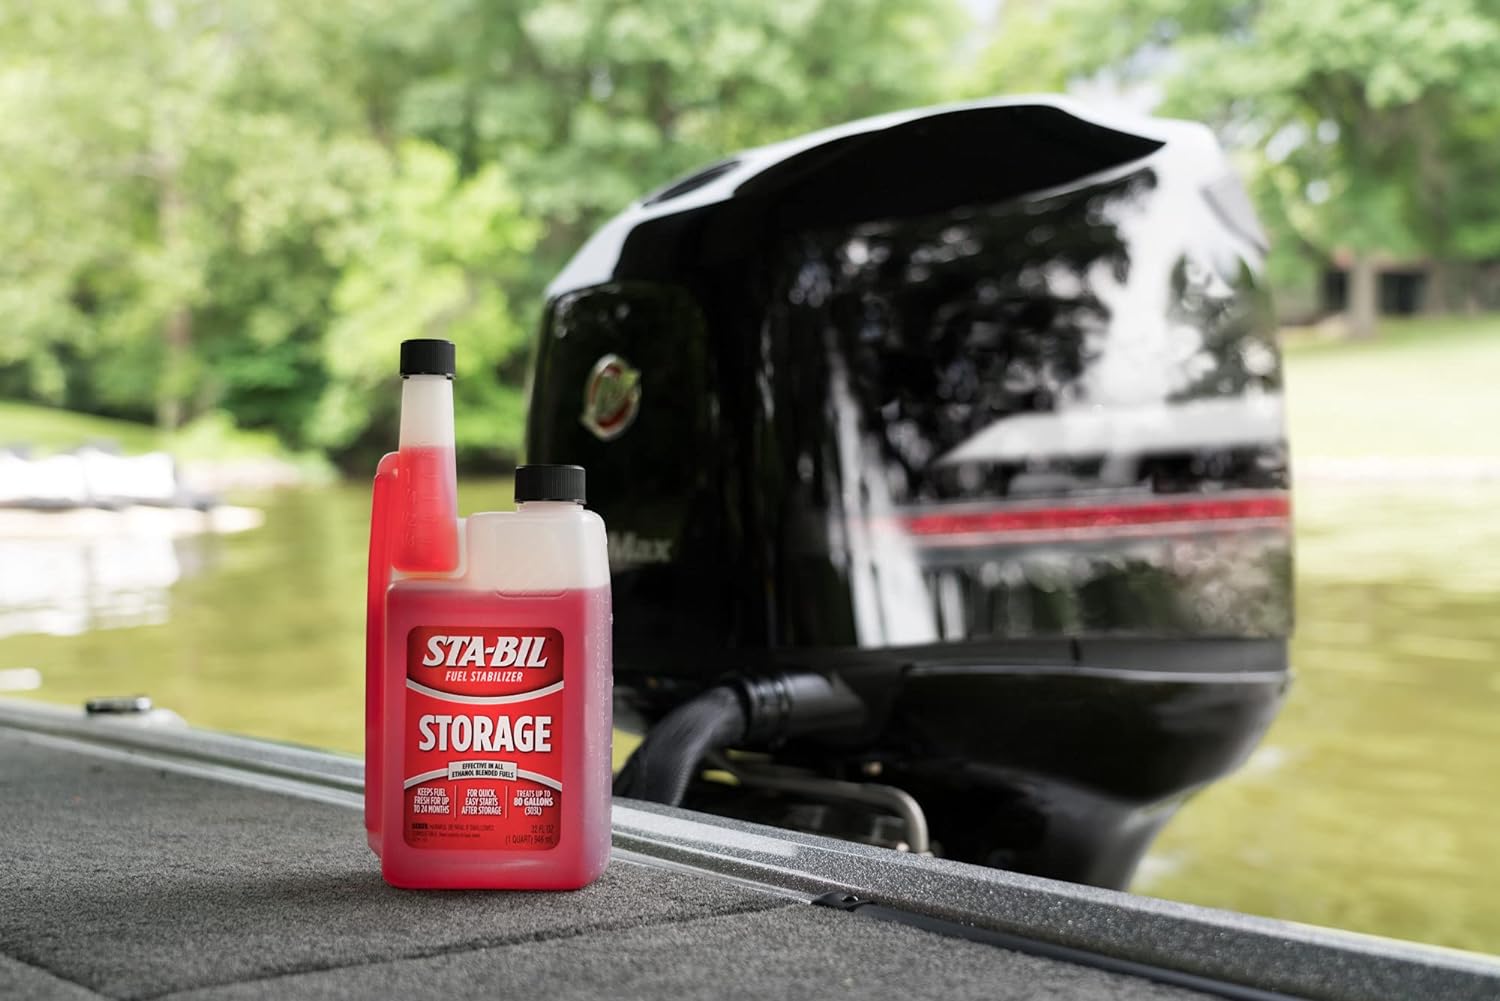 STA-BIL Storage Fuel Stabilizer - Keeps Fuel Fresh for 24 Months - Prevents Corrosion - Gasoline Treatment that Protects Fuel System - Fuel Saver - Treats 80 Gallons - 32 Fl. Oz. (22287)